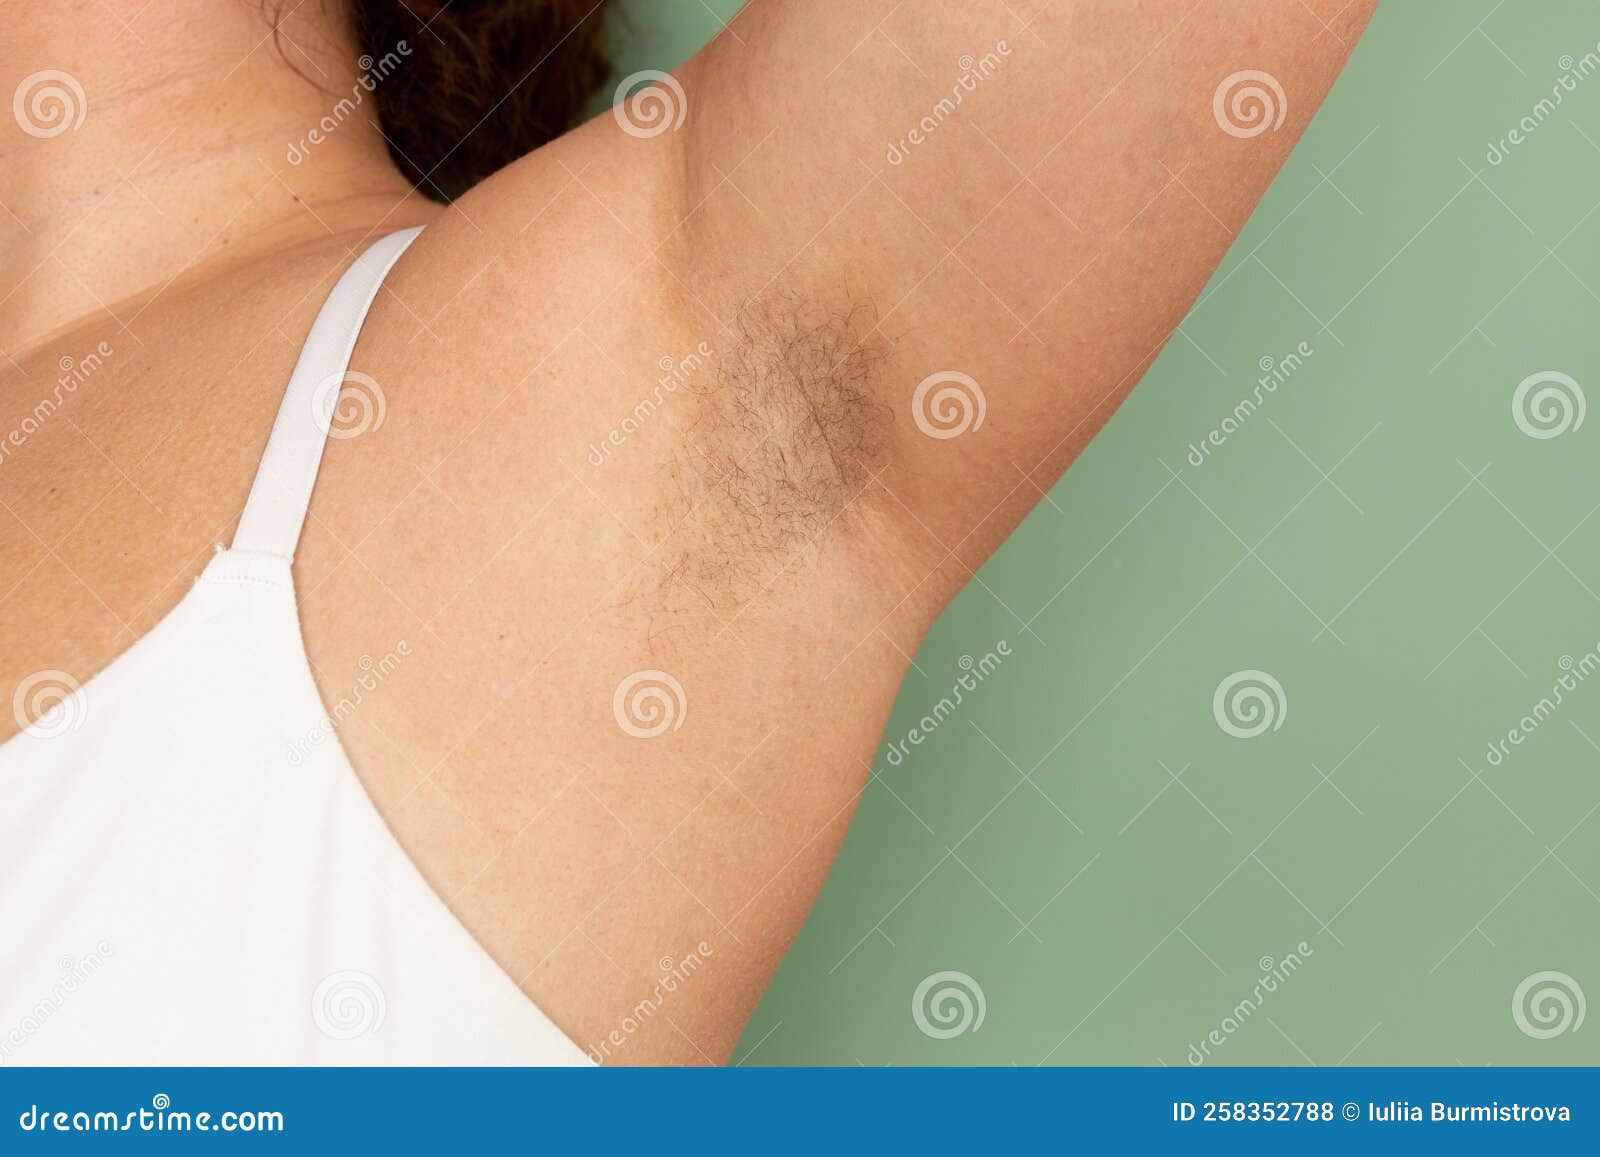 Woman with Hairy Underarms Closeup, Free Copy Space, Green Background.  Raised Arm with Armpit Hair Stock Photo - Image of deodorant, depilation:  258352788